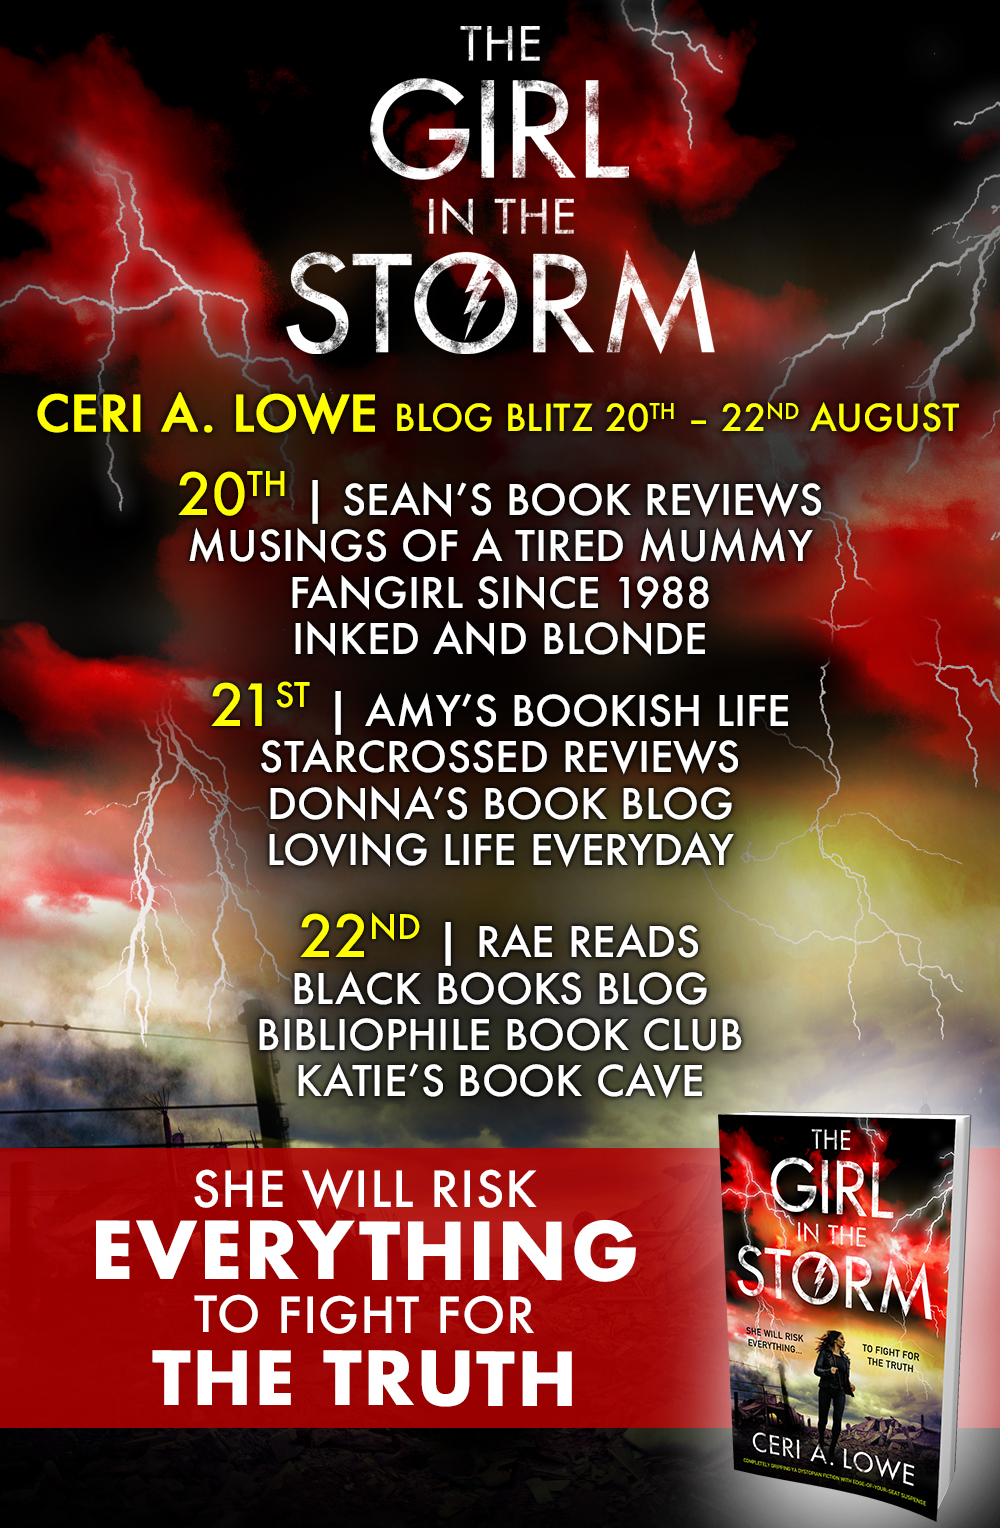 The Girl in the Storm - Blog Blitz